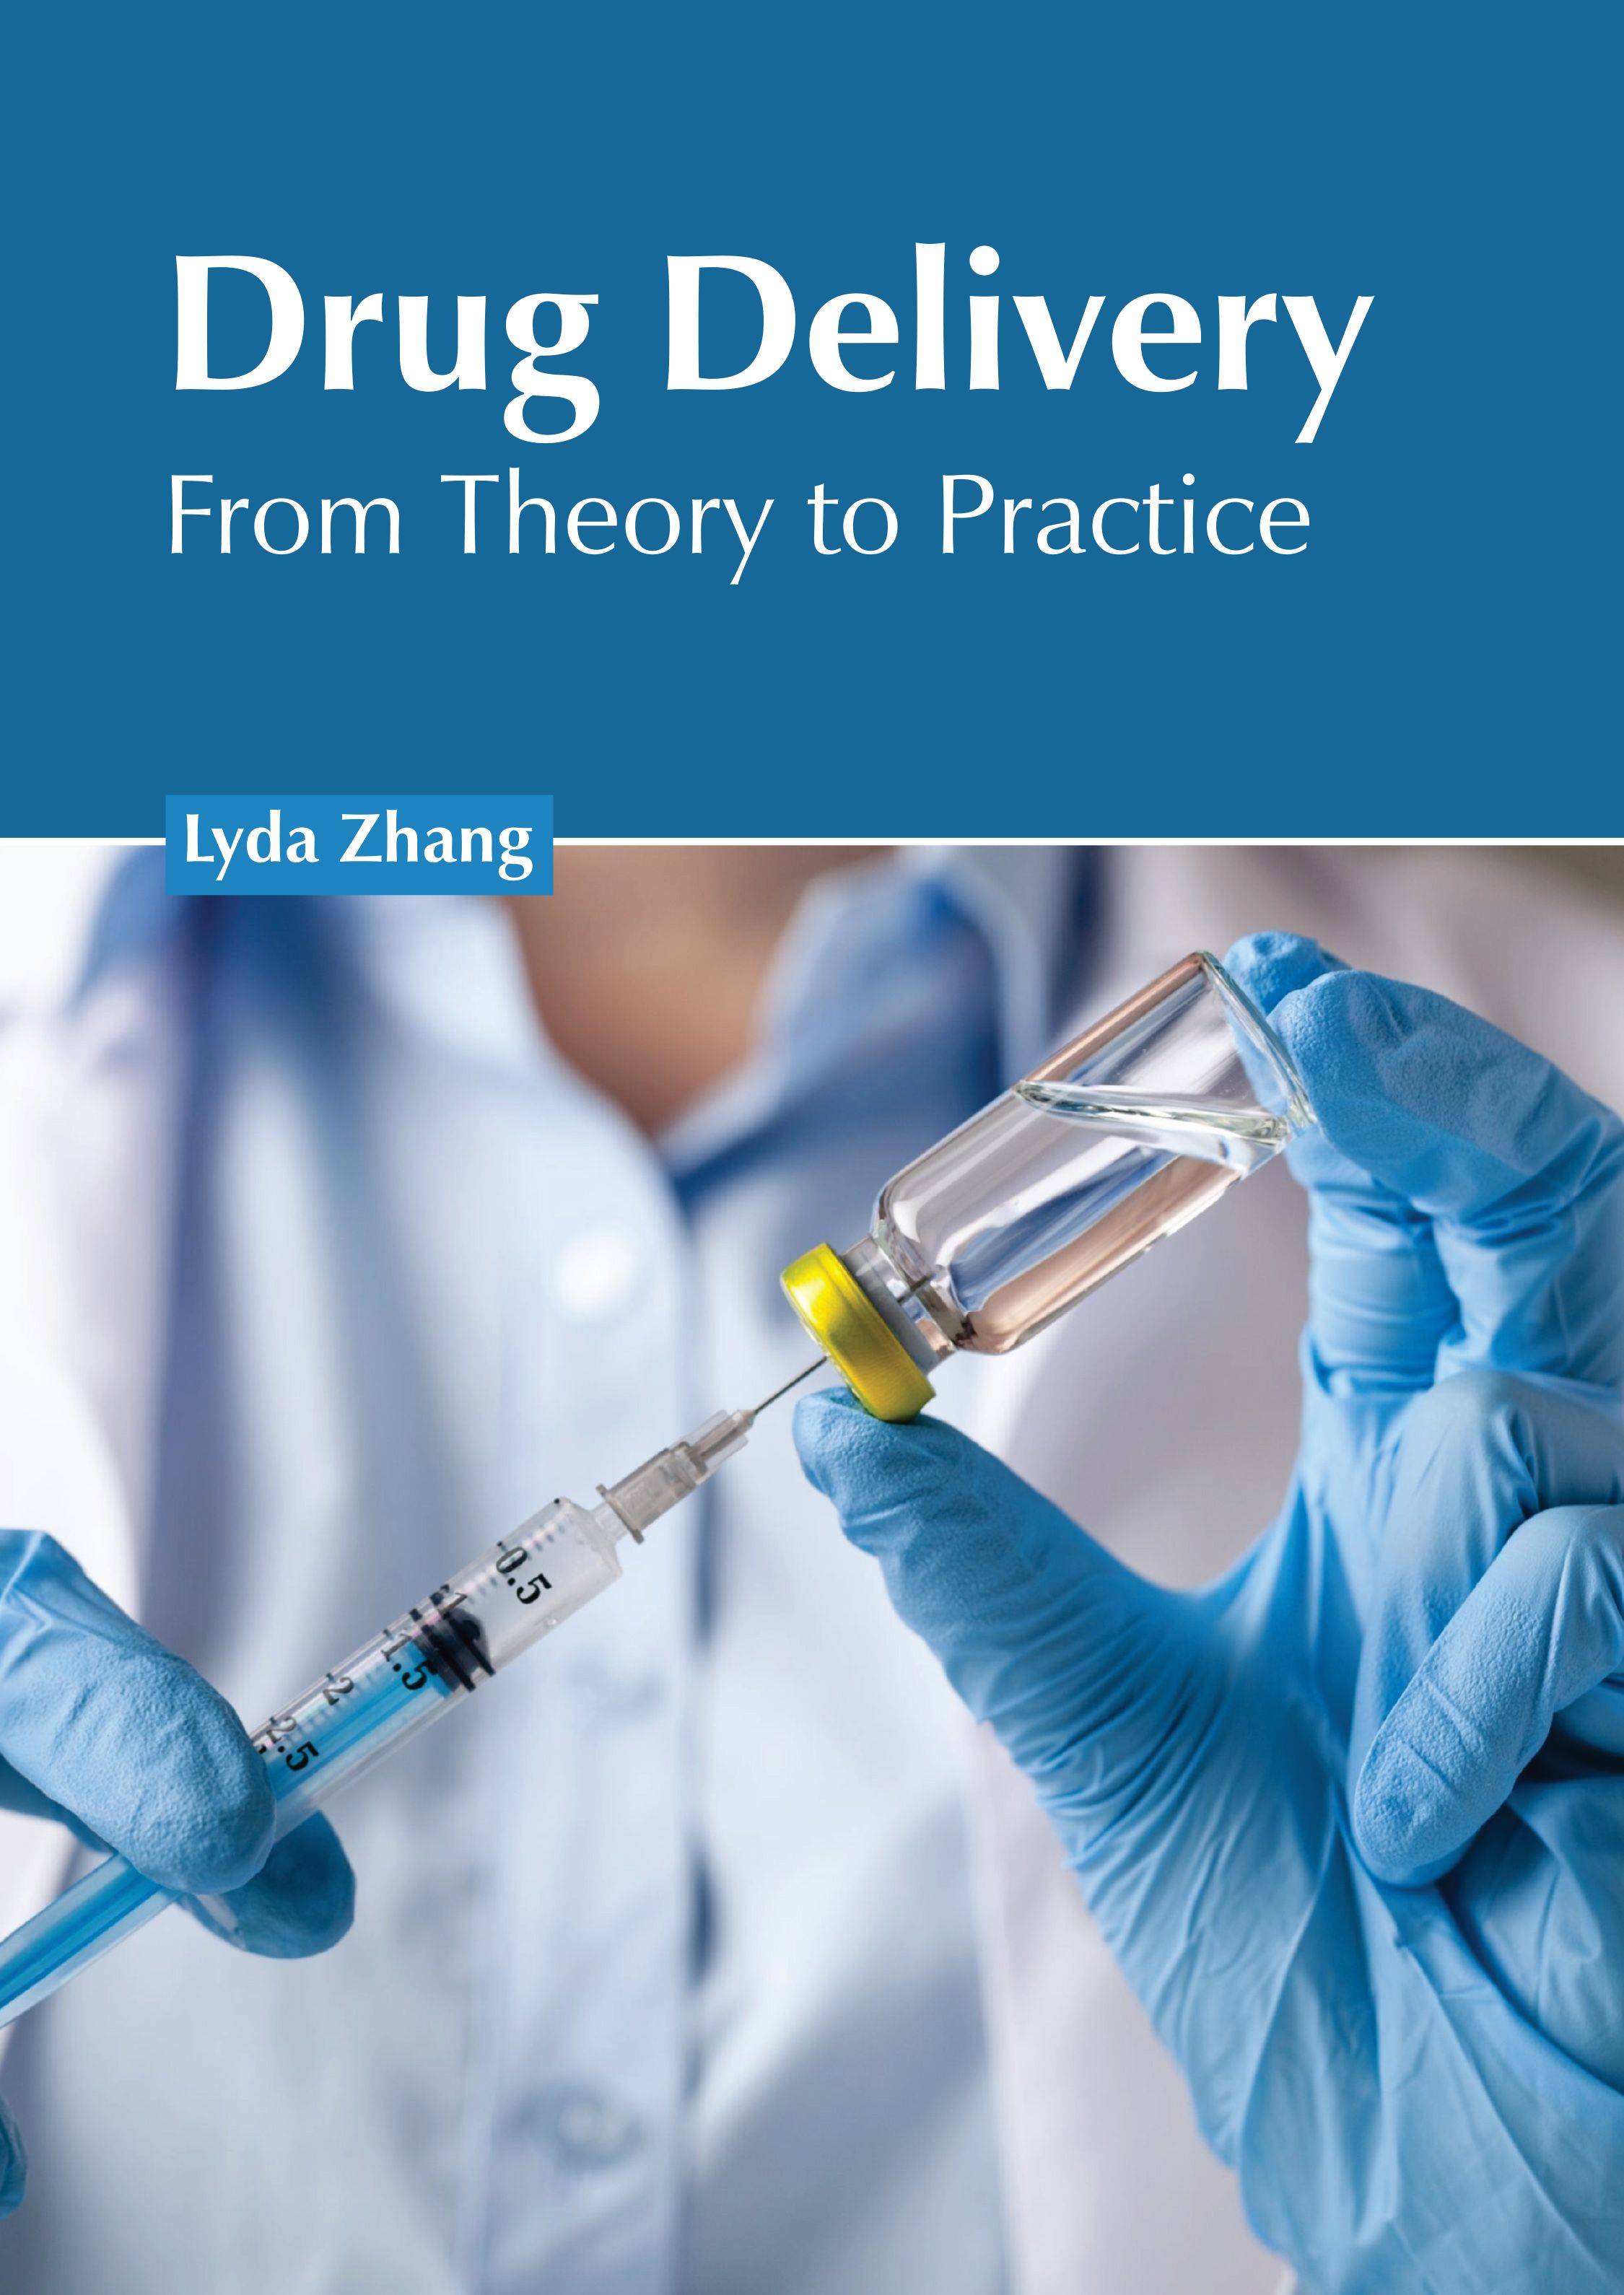 DRUG DELIVERY: FROM THEORY TO PRACTICE